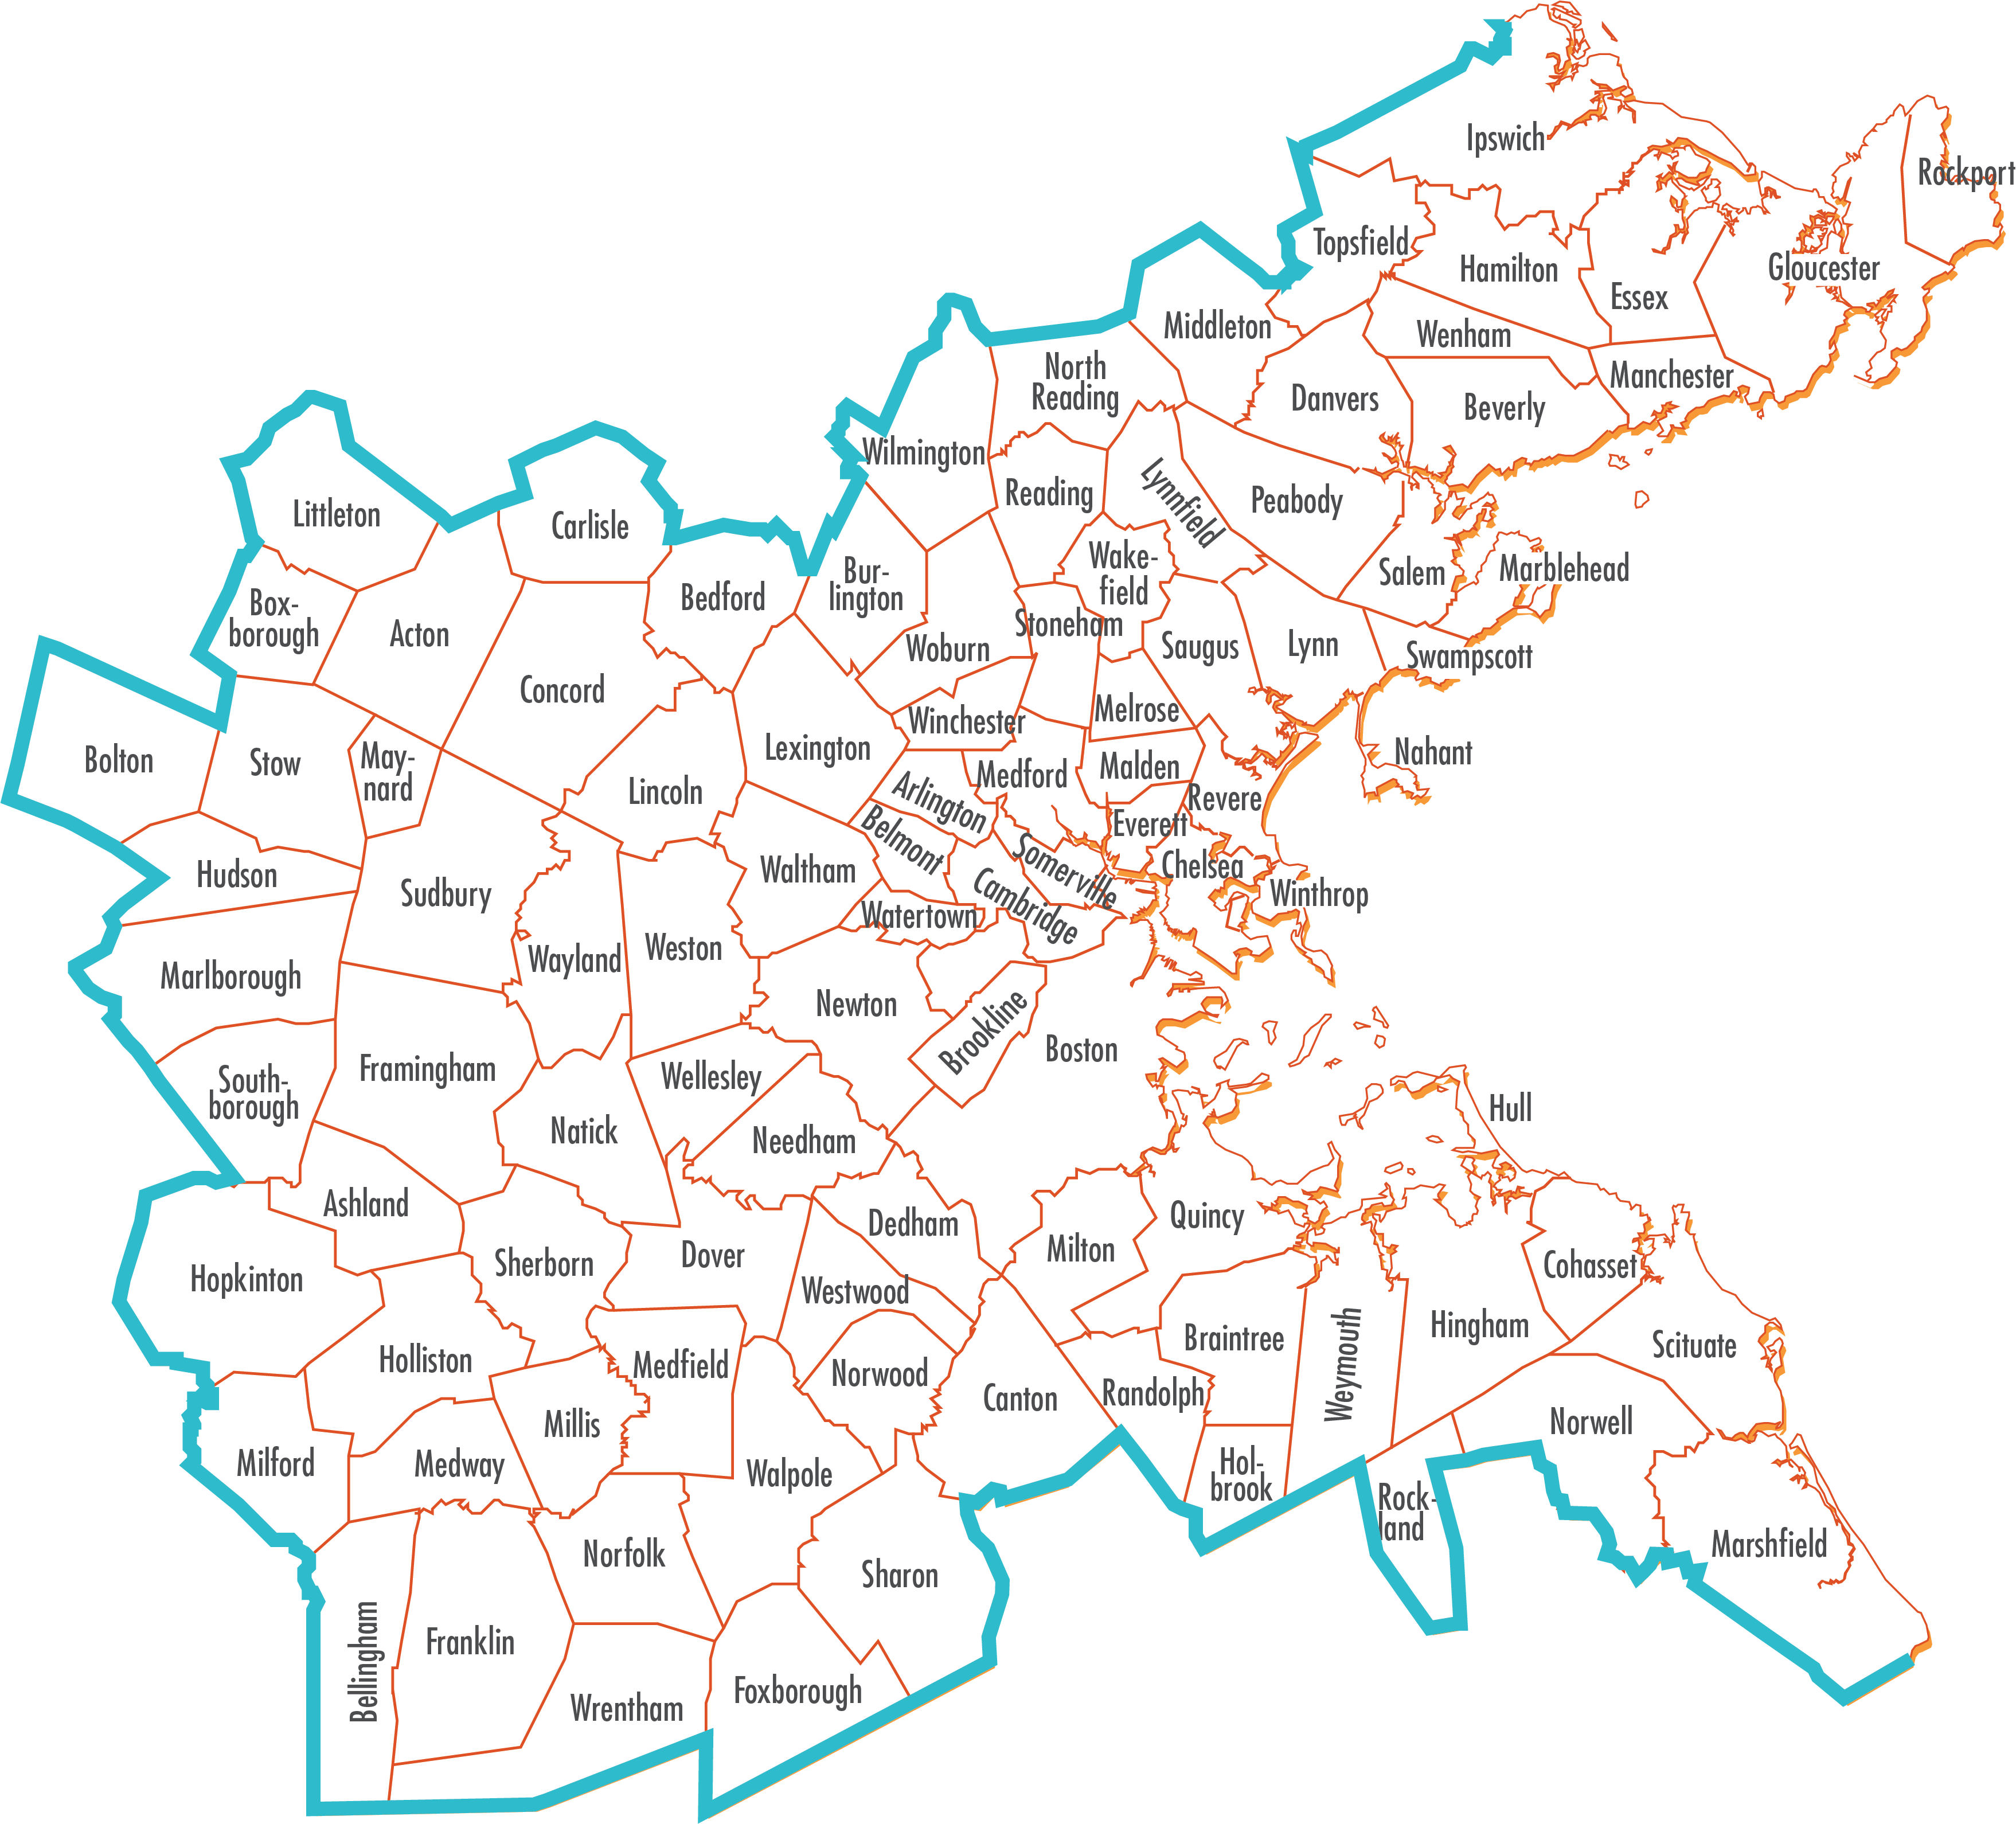 This map shows the municipalities that are within the MPO region.